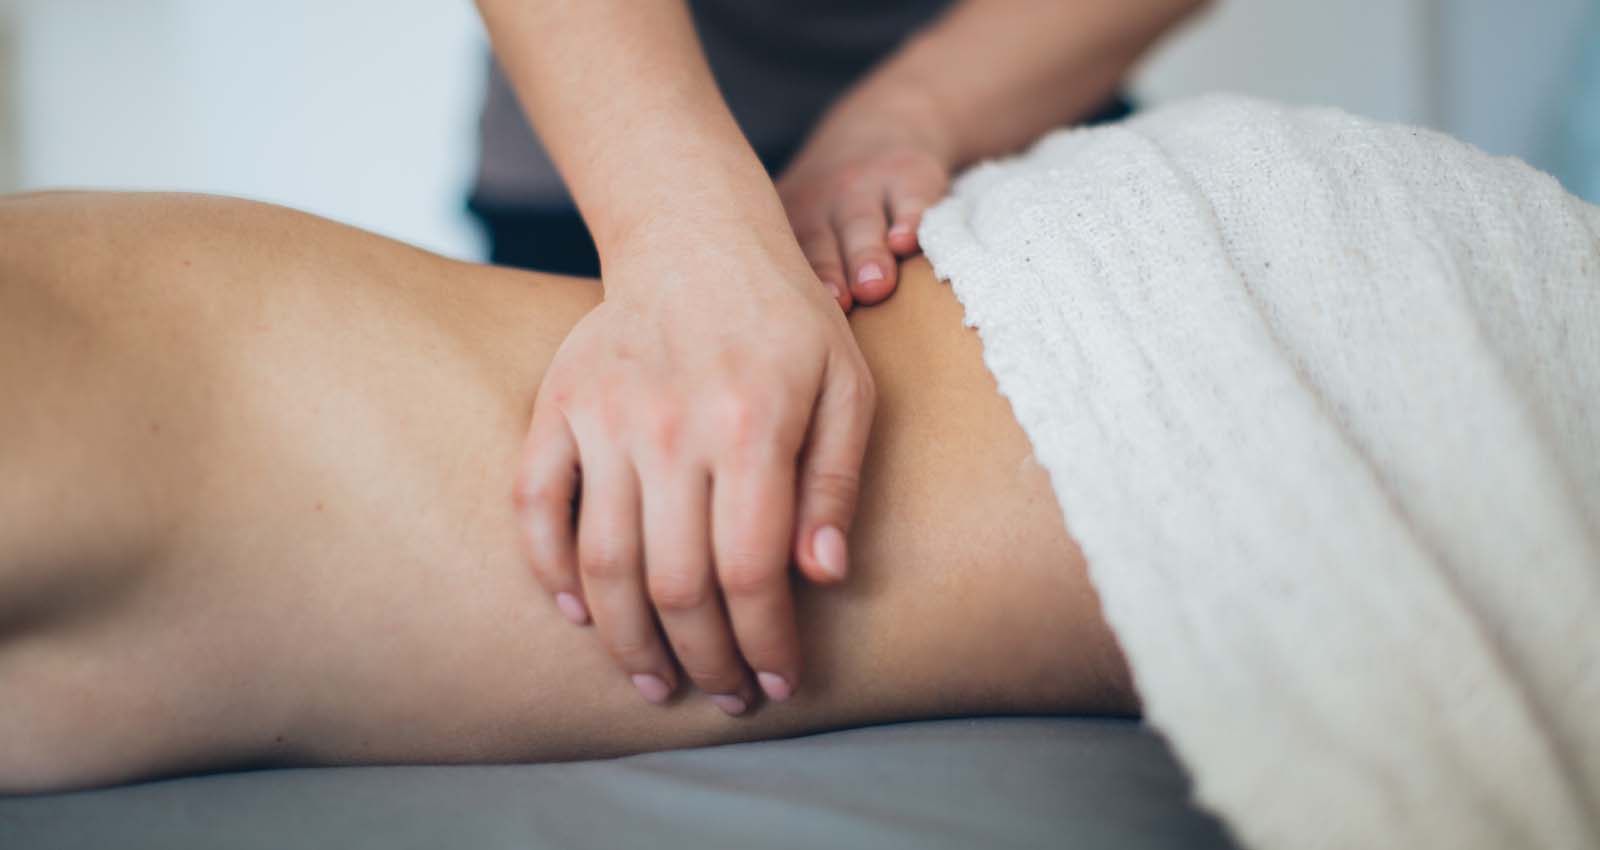 What You Need to Know Before Having a Nude Massage